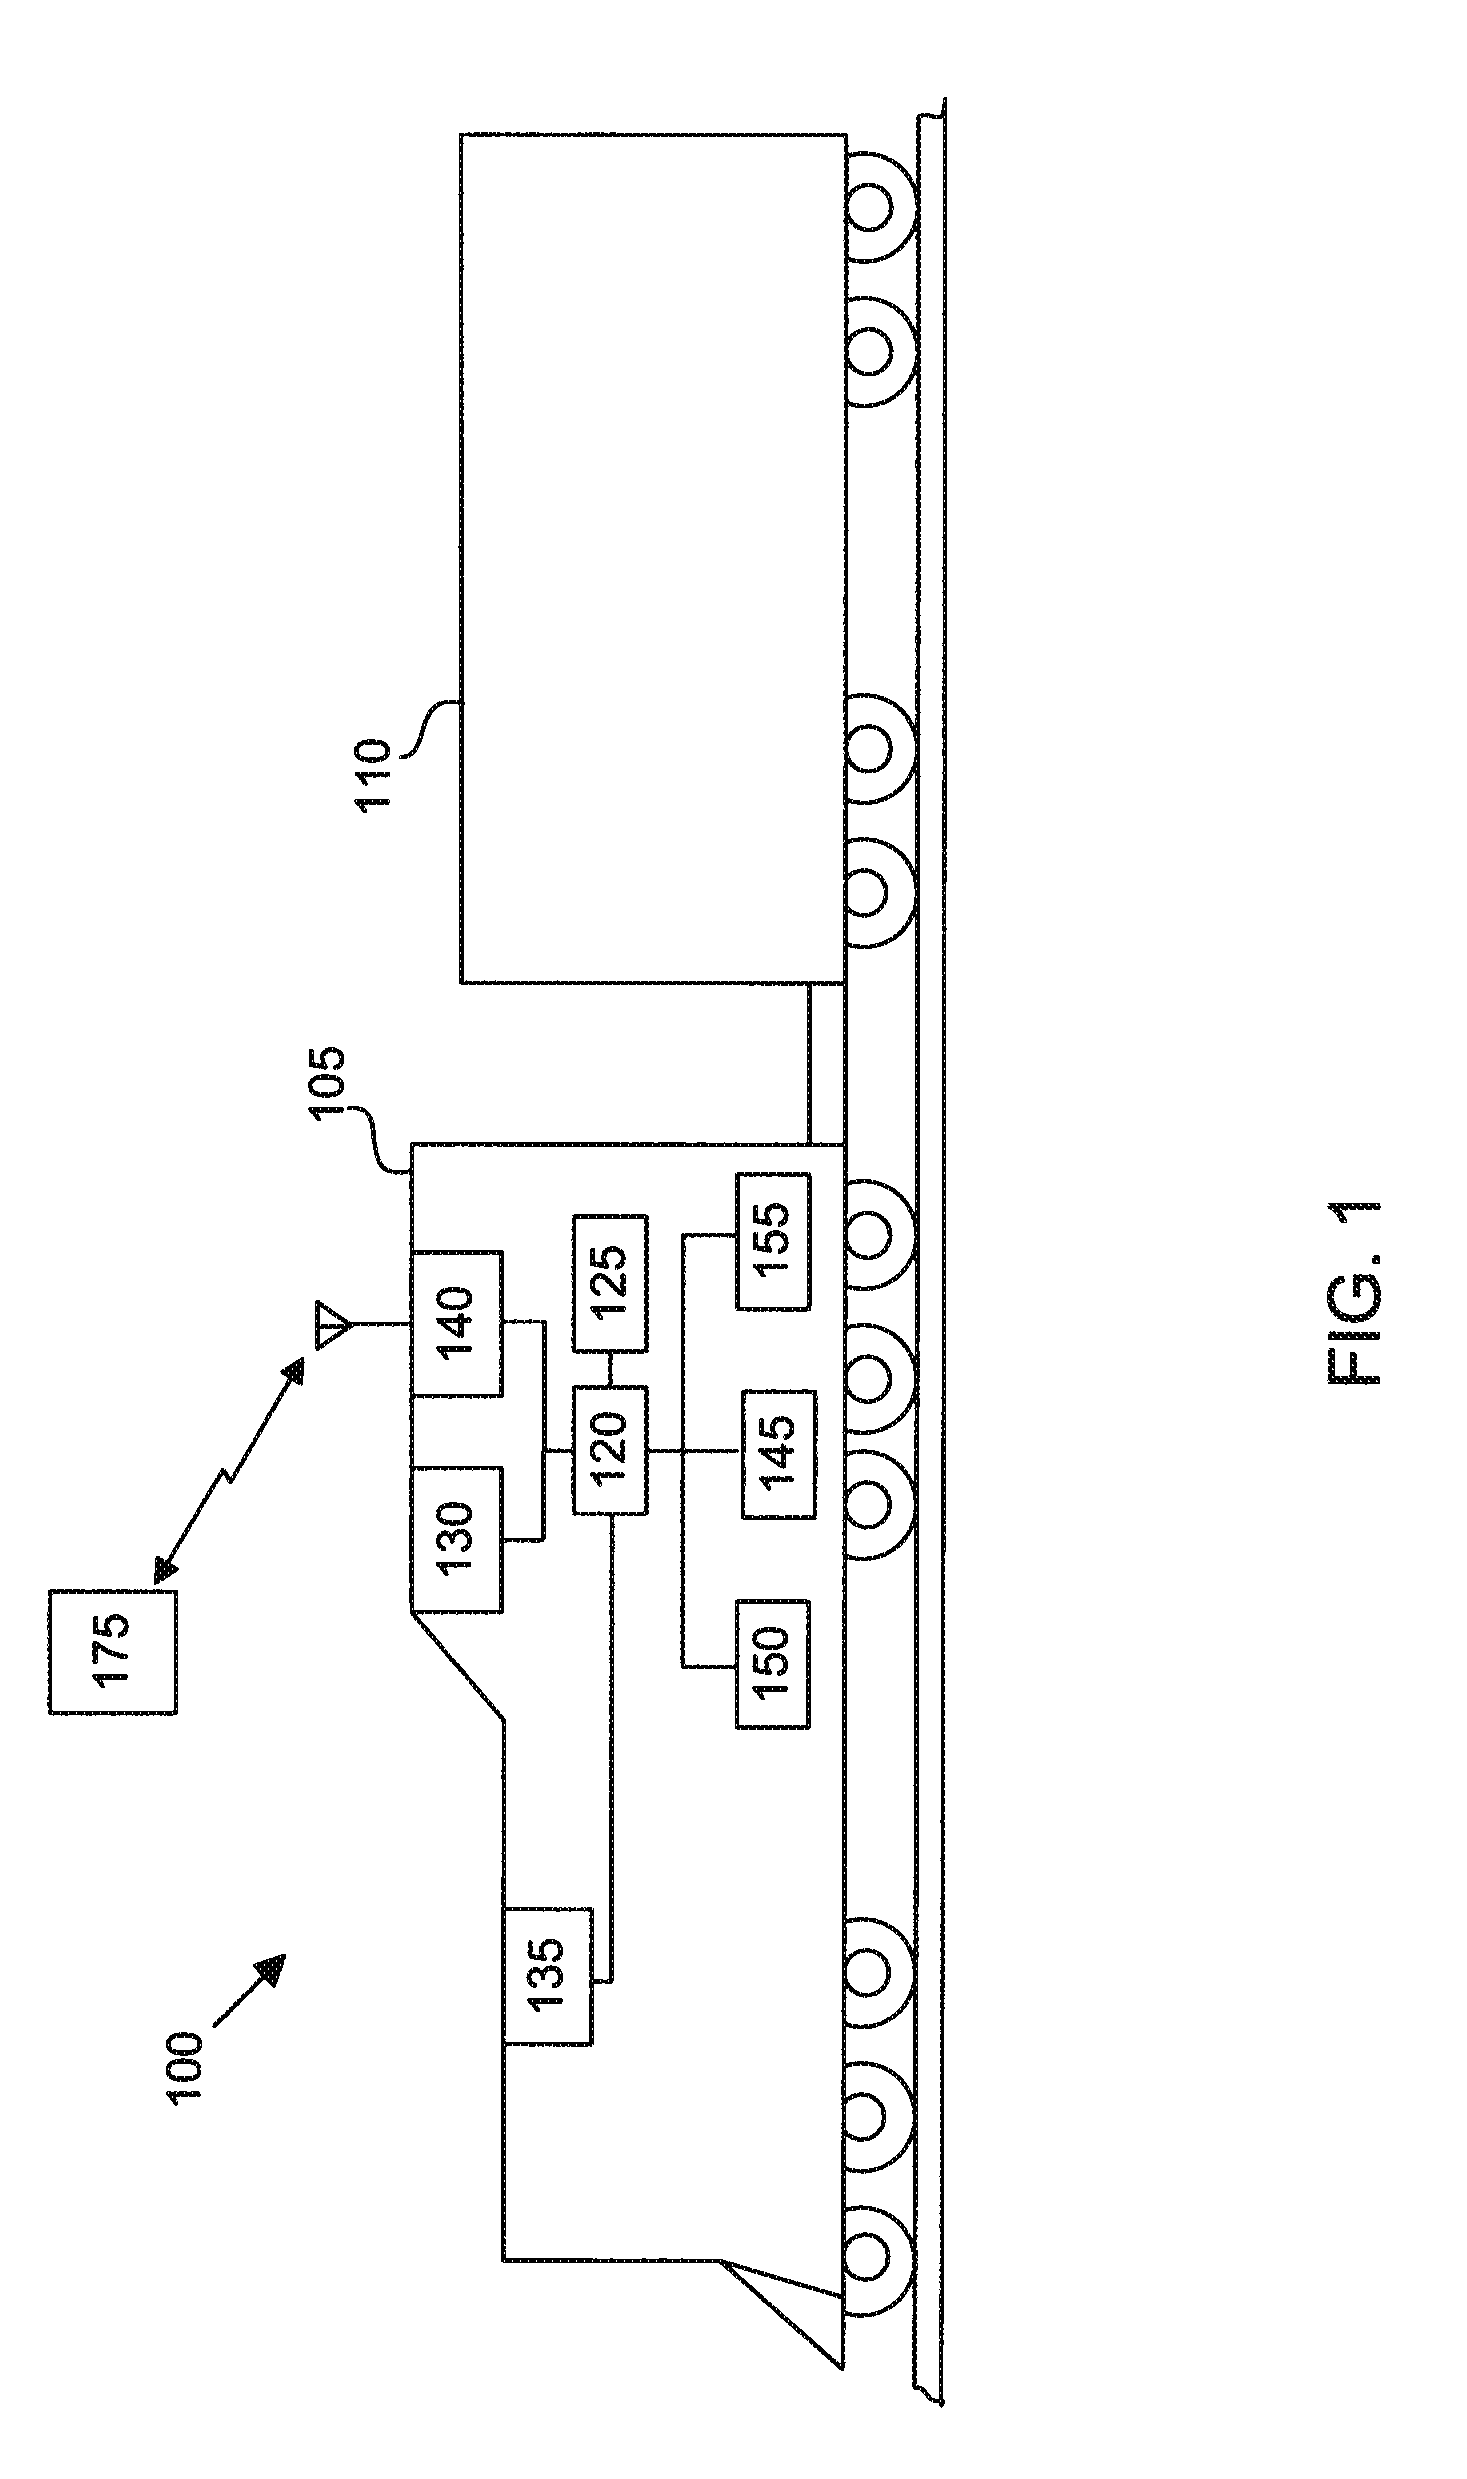 Rail vehicle consist speed control system and method